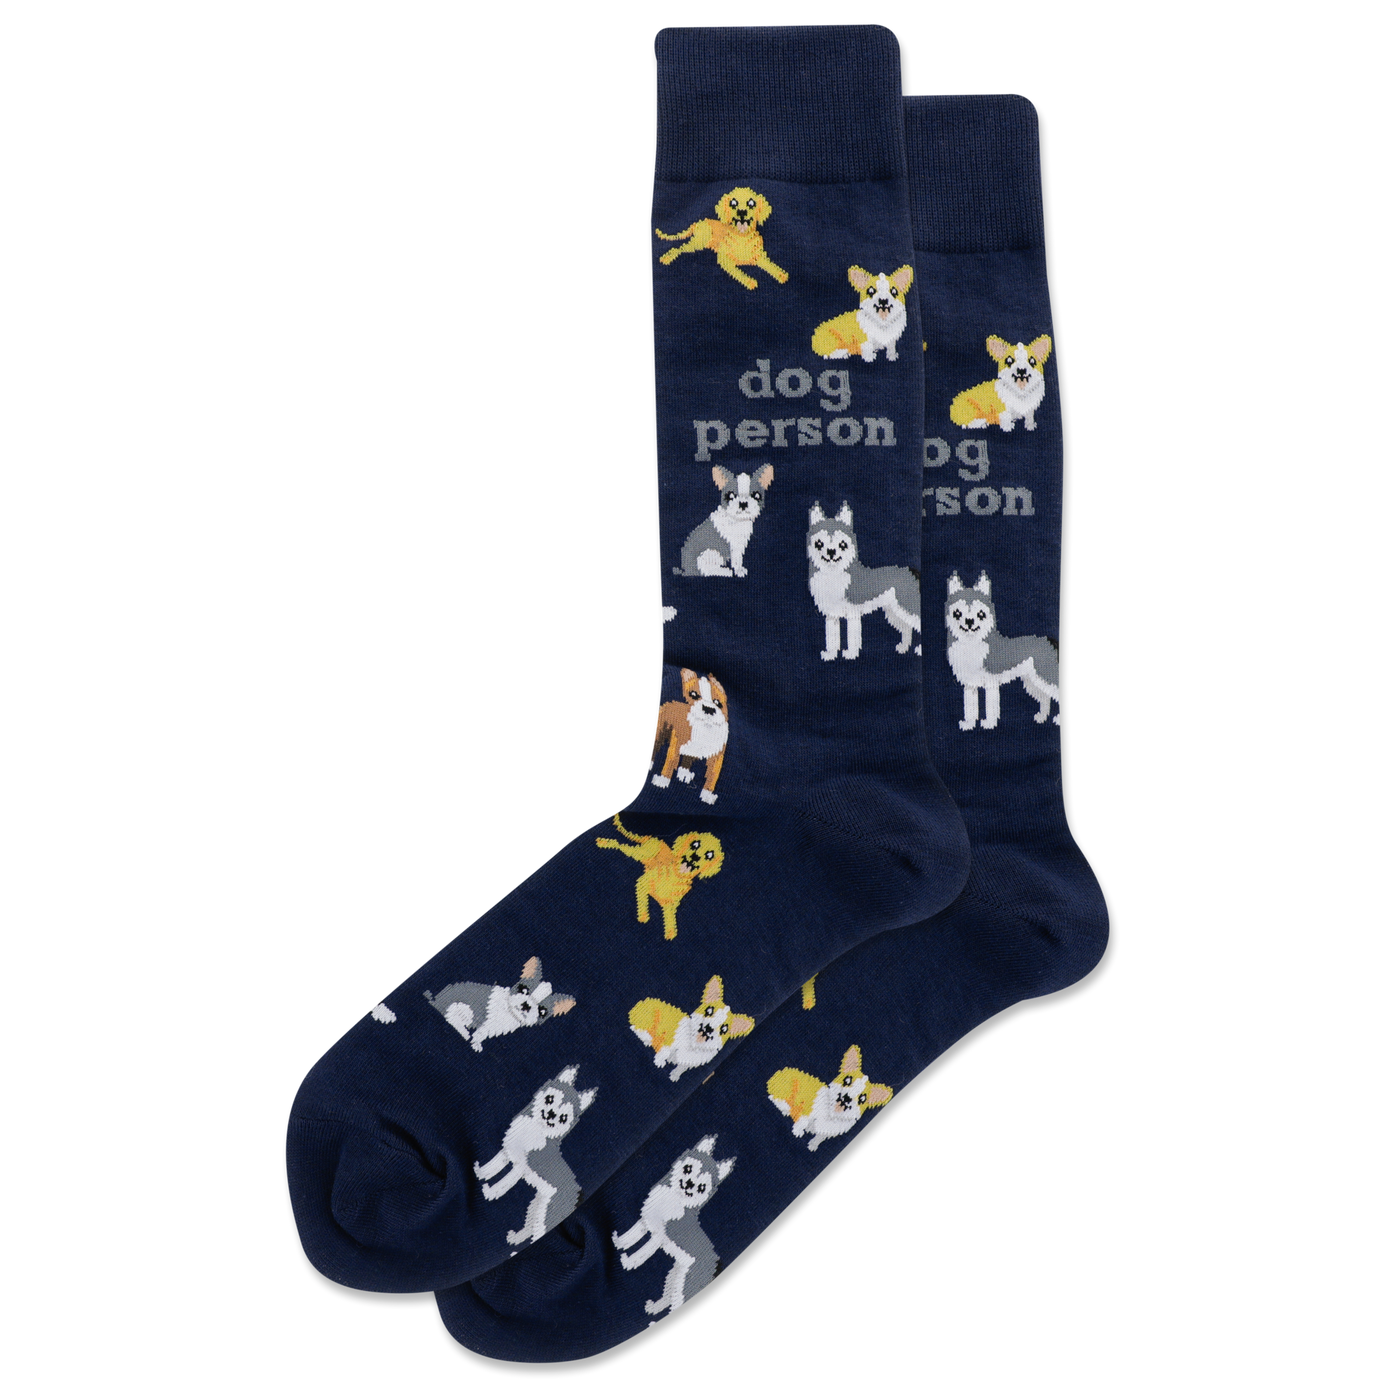 "Dog Person" Crew Socks by Hot Sox